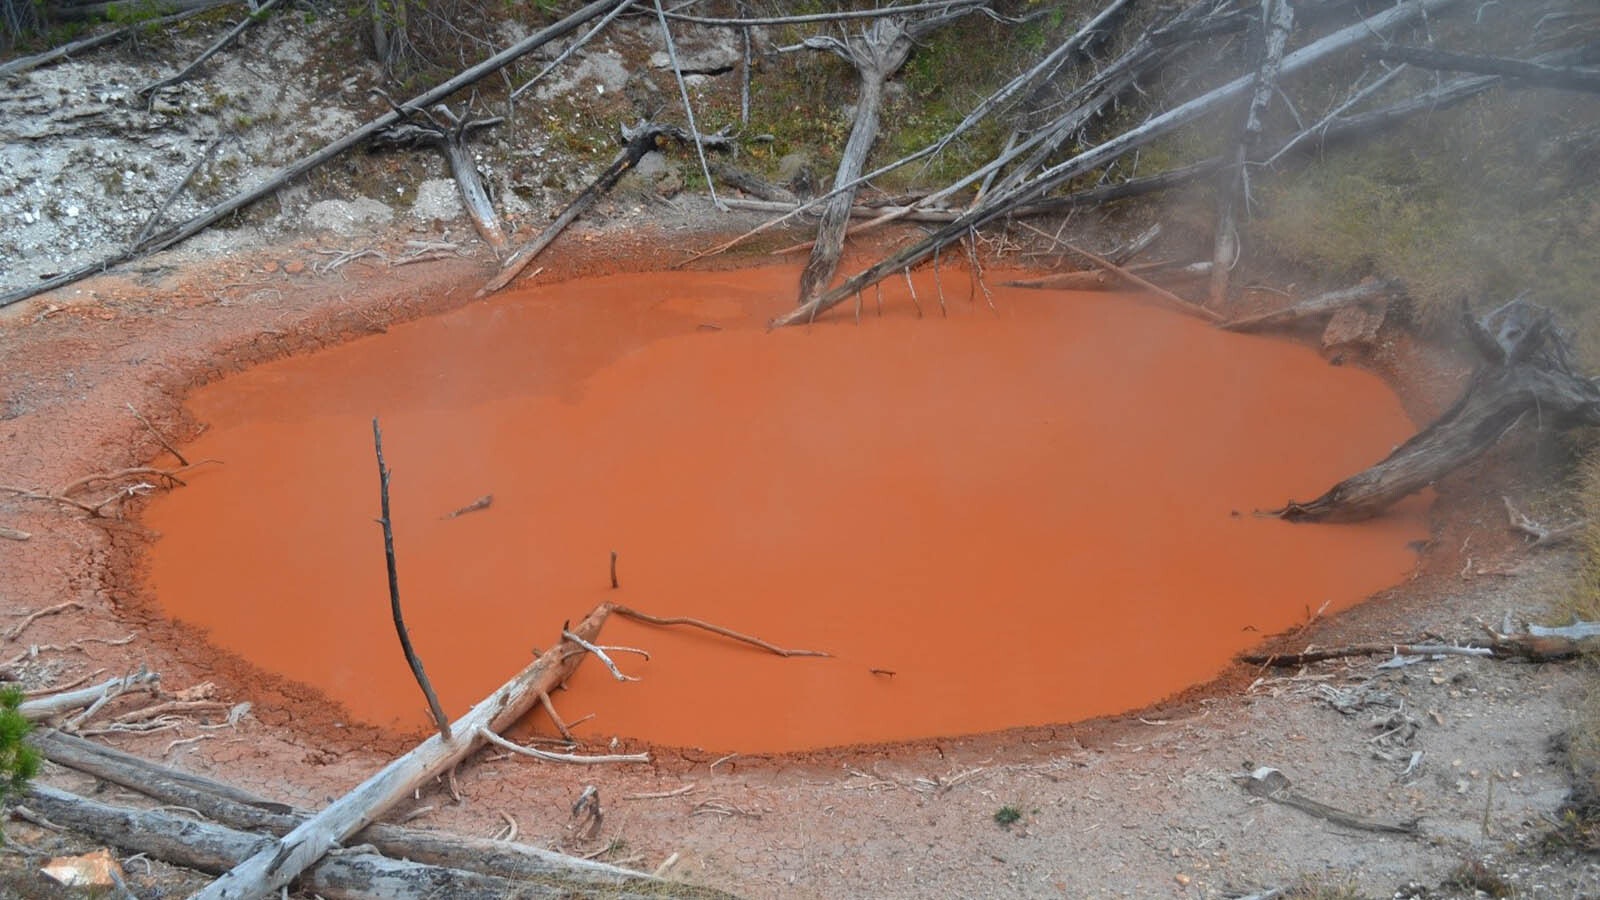 Tomato Soup Pool in Yellowstone National Park is near the Midway Geyser Basin, and has been off limits since 2016.